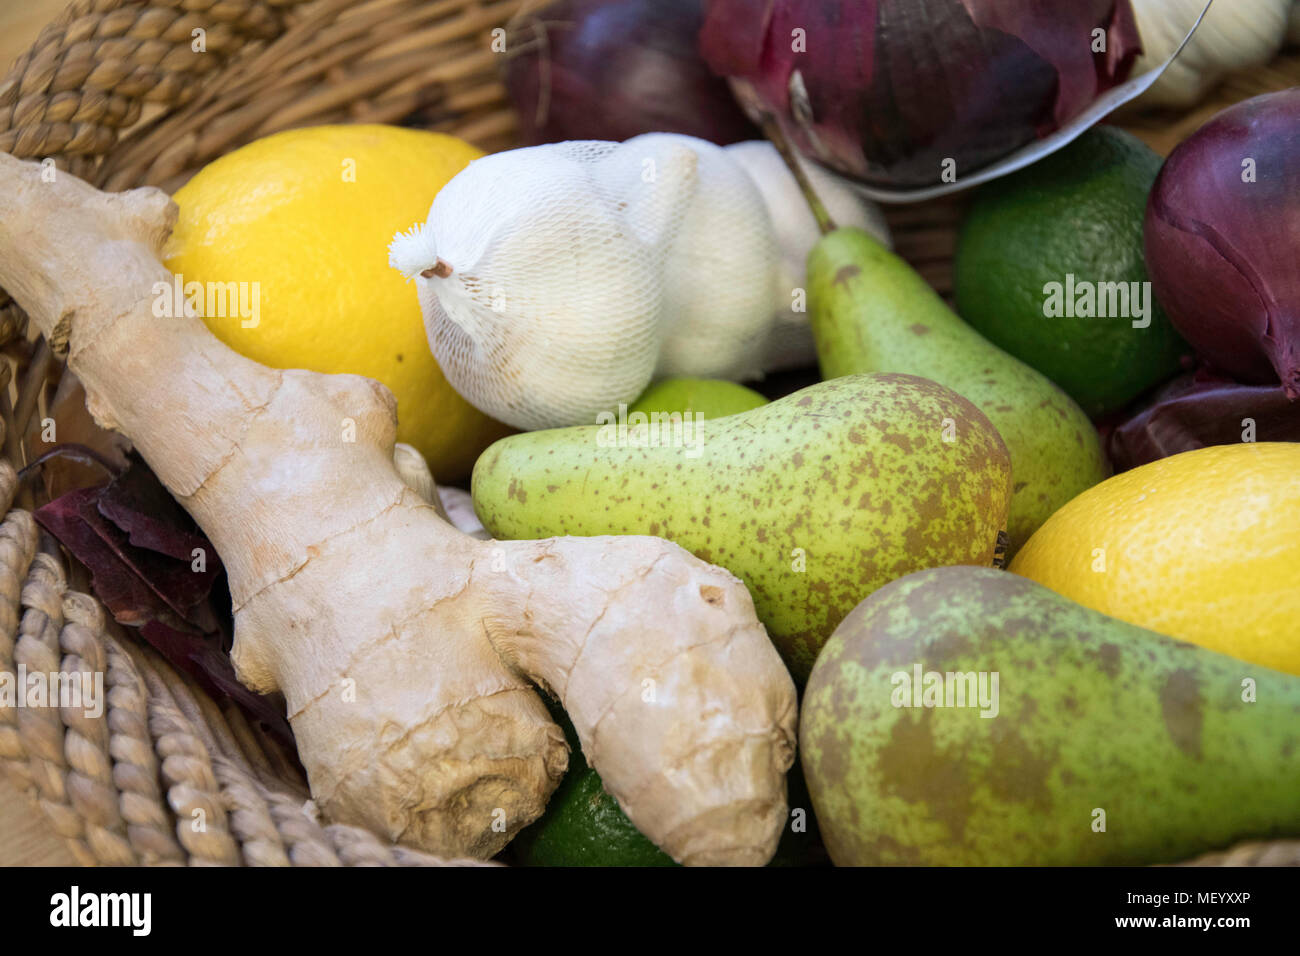 mix fruits and vegetables basked including pears lemons and ginger Stock Photo